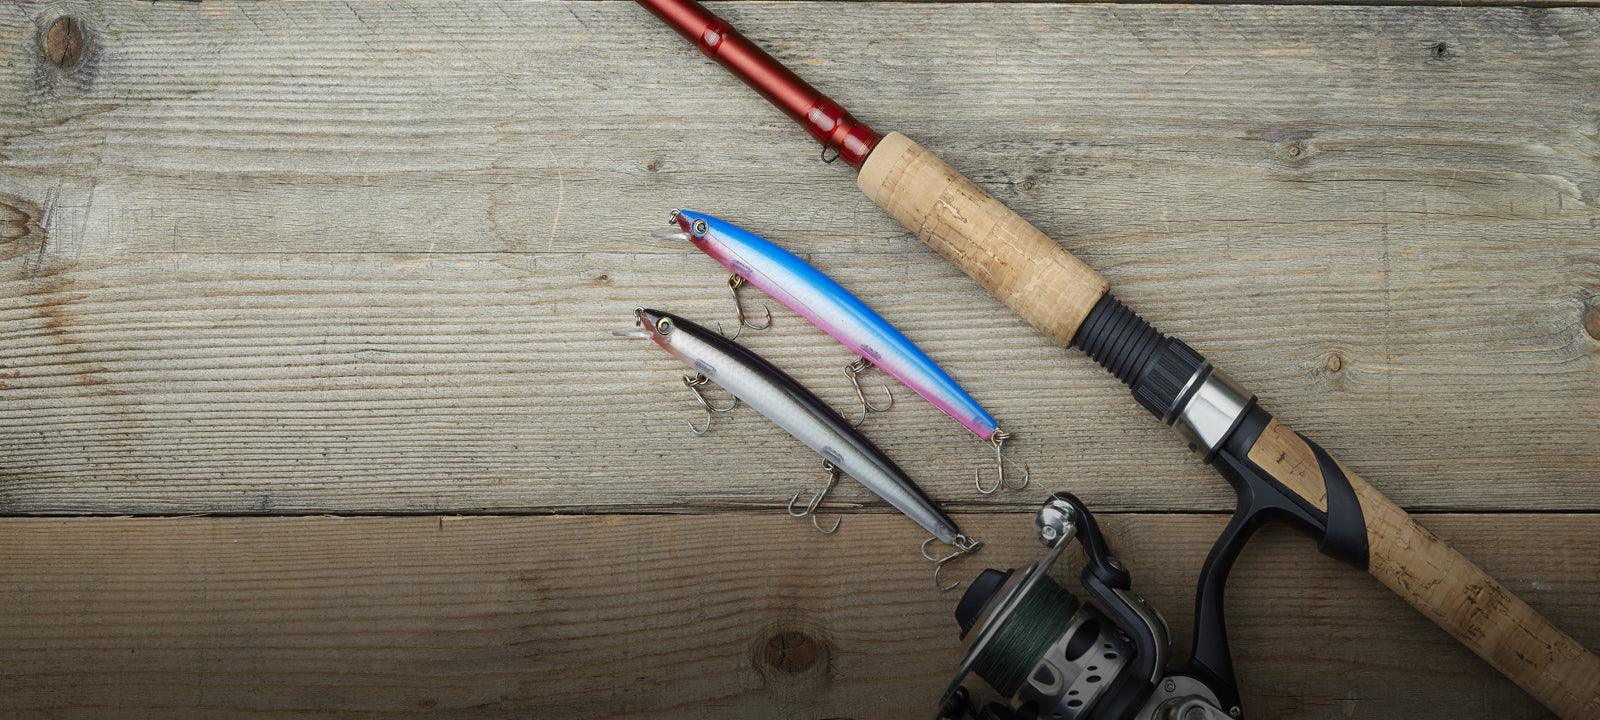 Trolling and Hardbody Lures - variety of Sizes & Styles